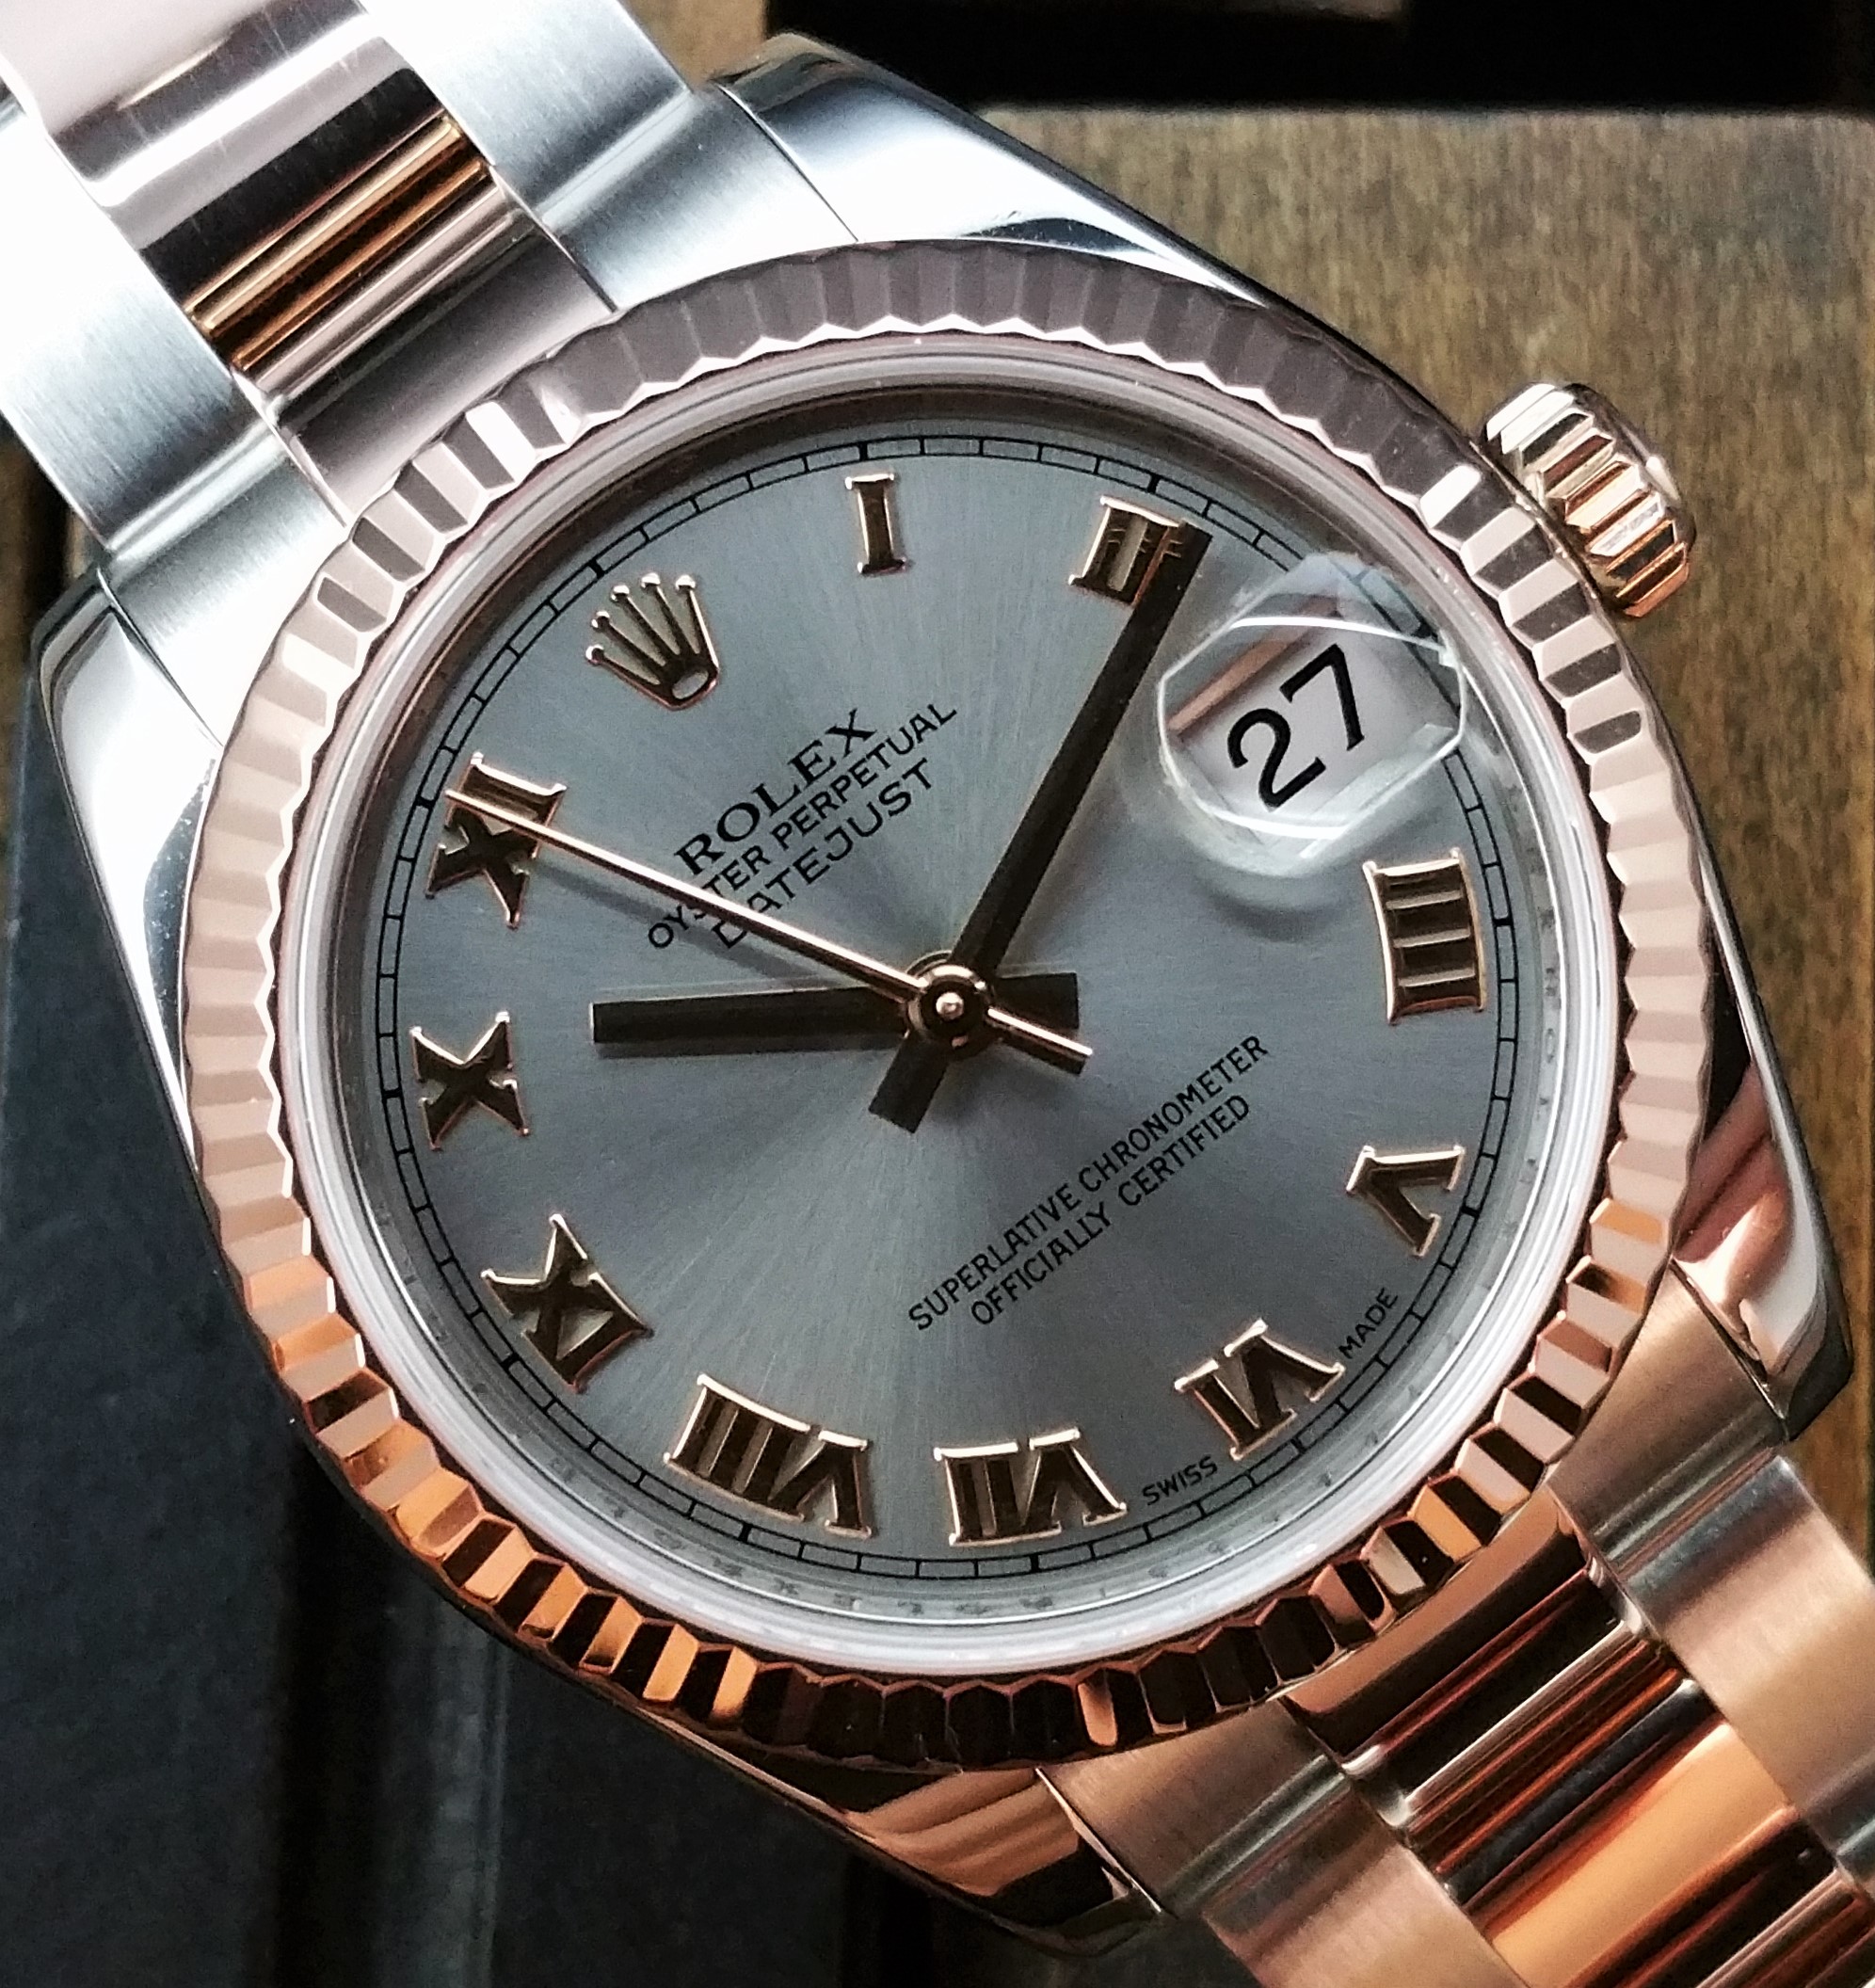 2010 Rolex Datejust Steel & Rose Gold 178271 Mide Size with Box & Papers